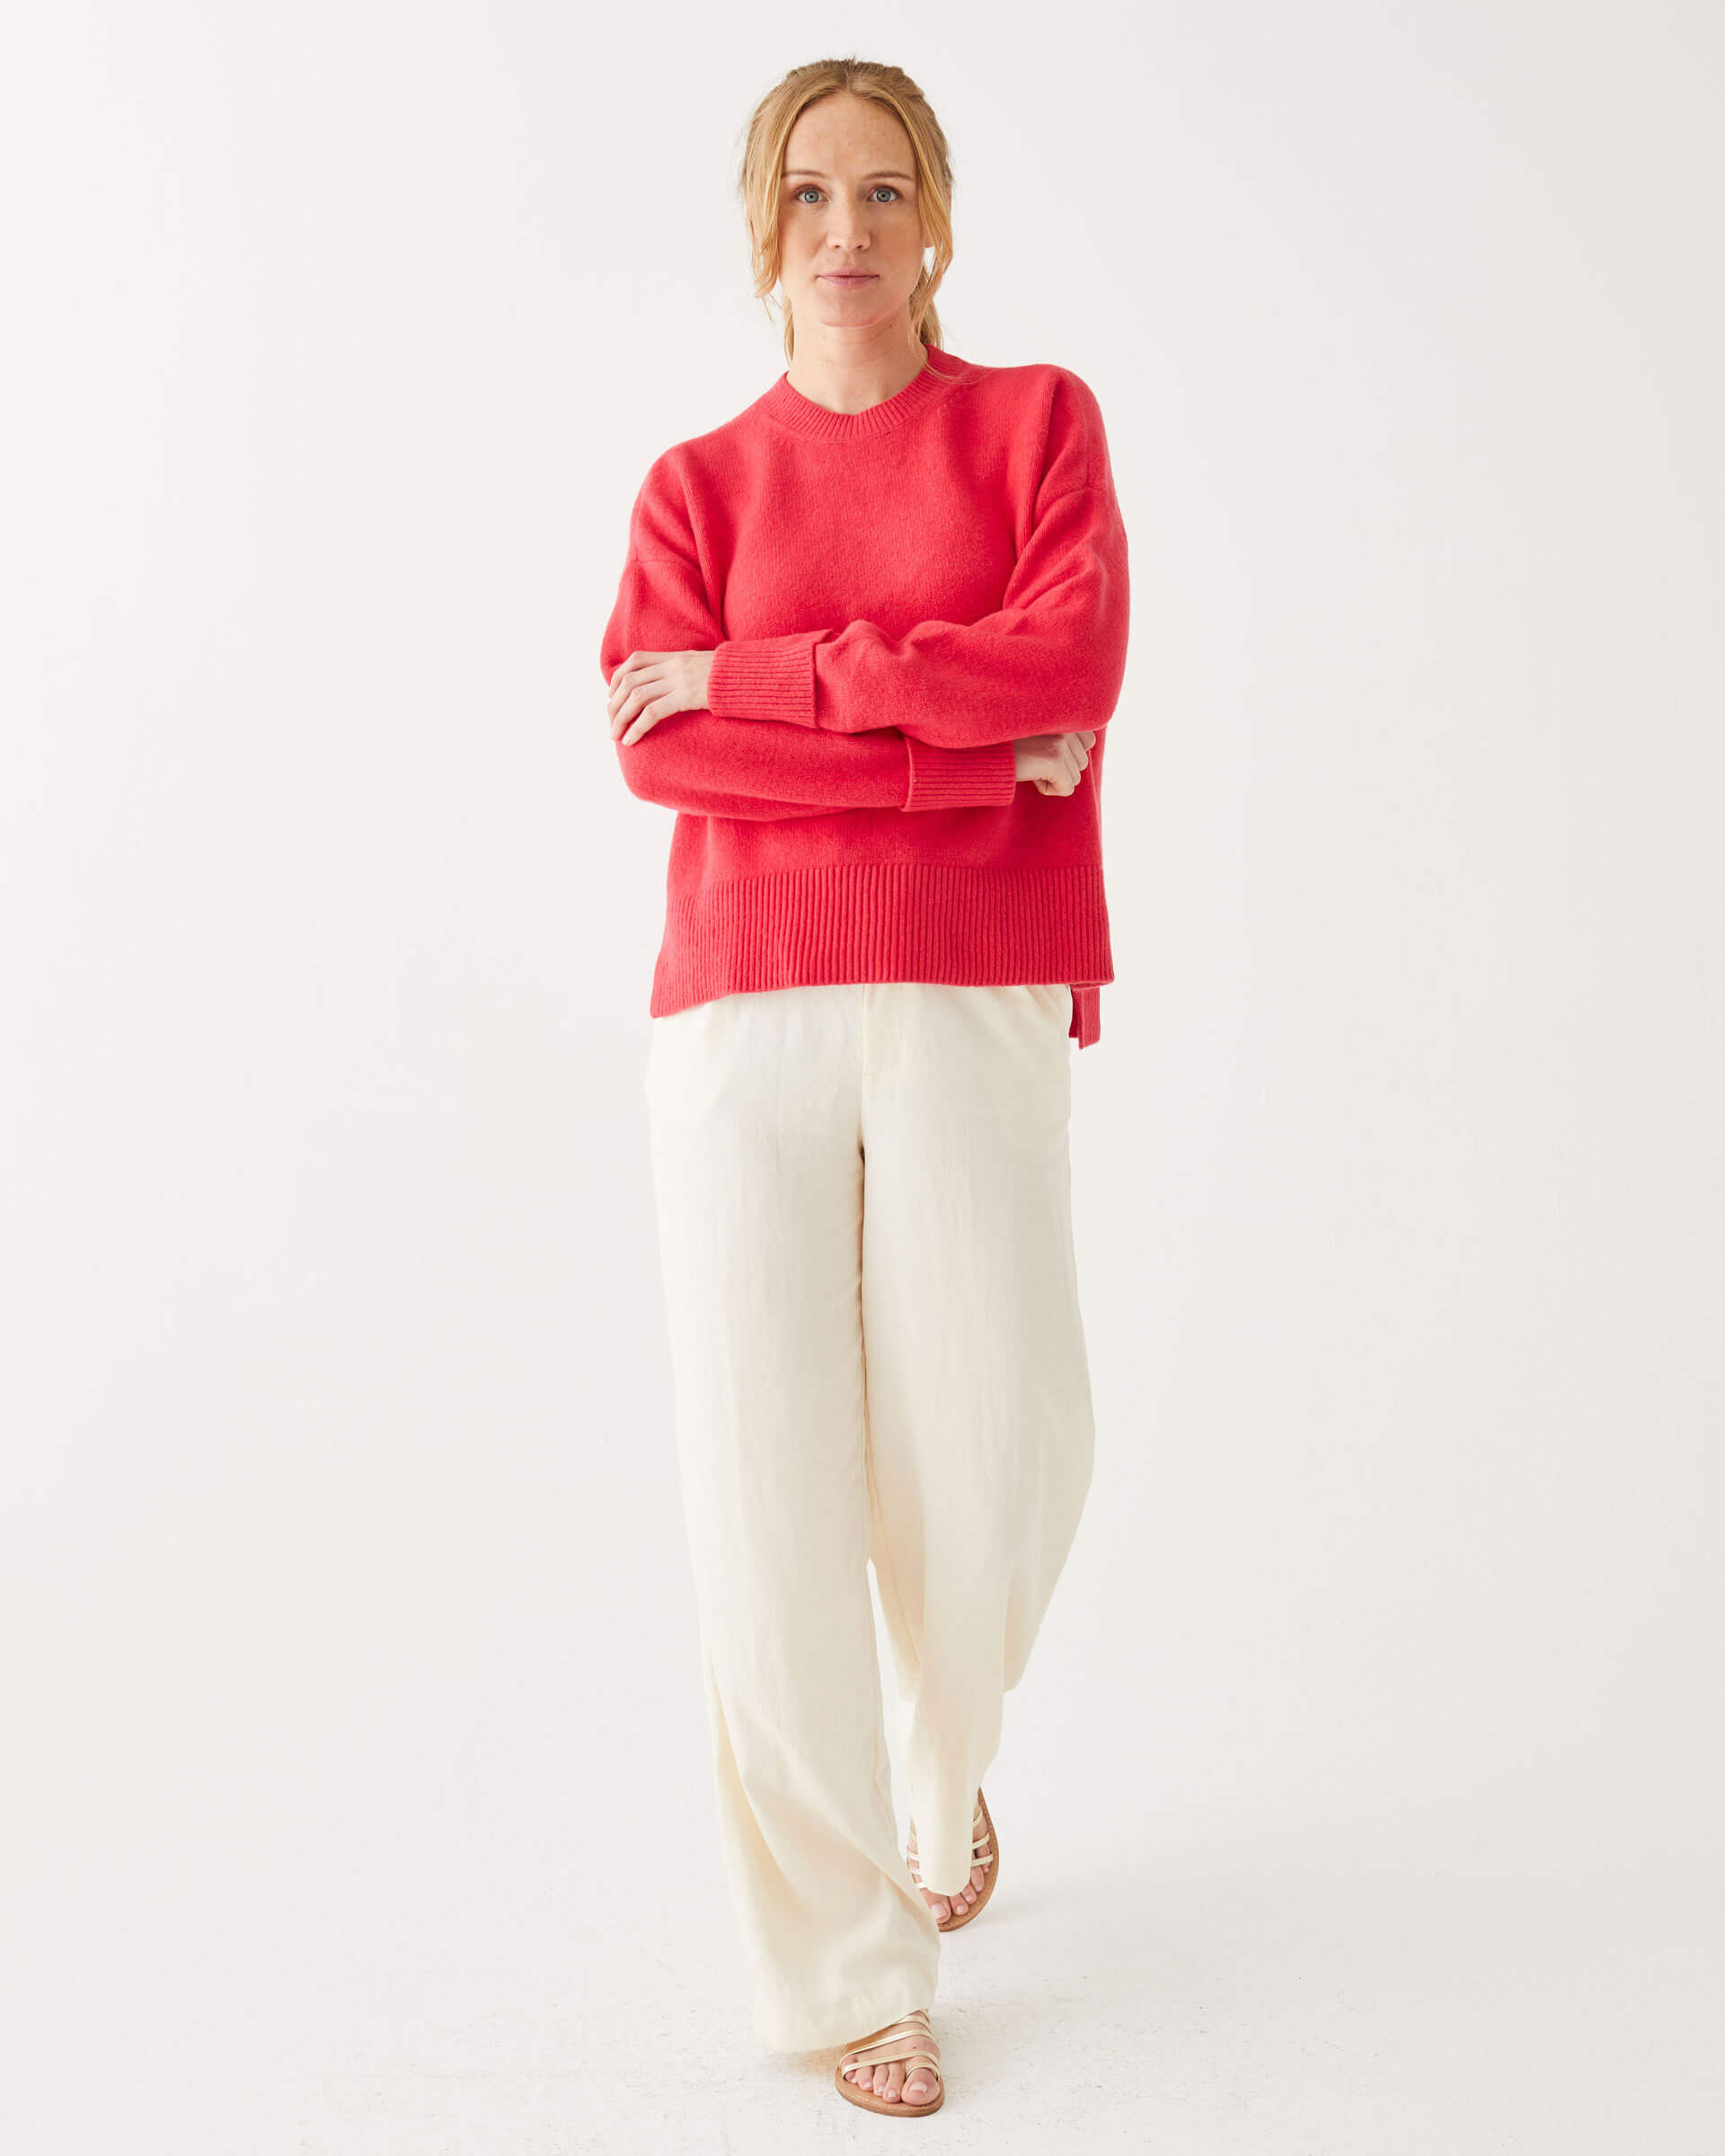 female wearing red crewneck sweater standing arms crossed in front of a white background